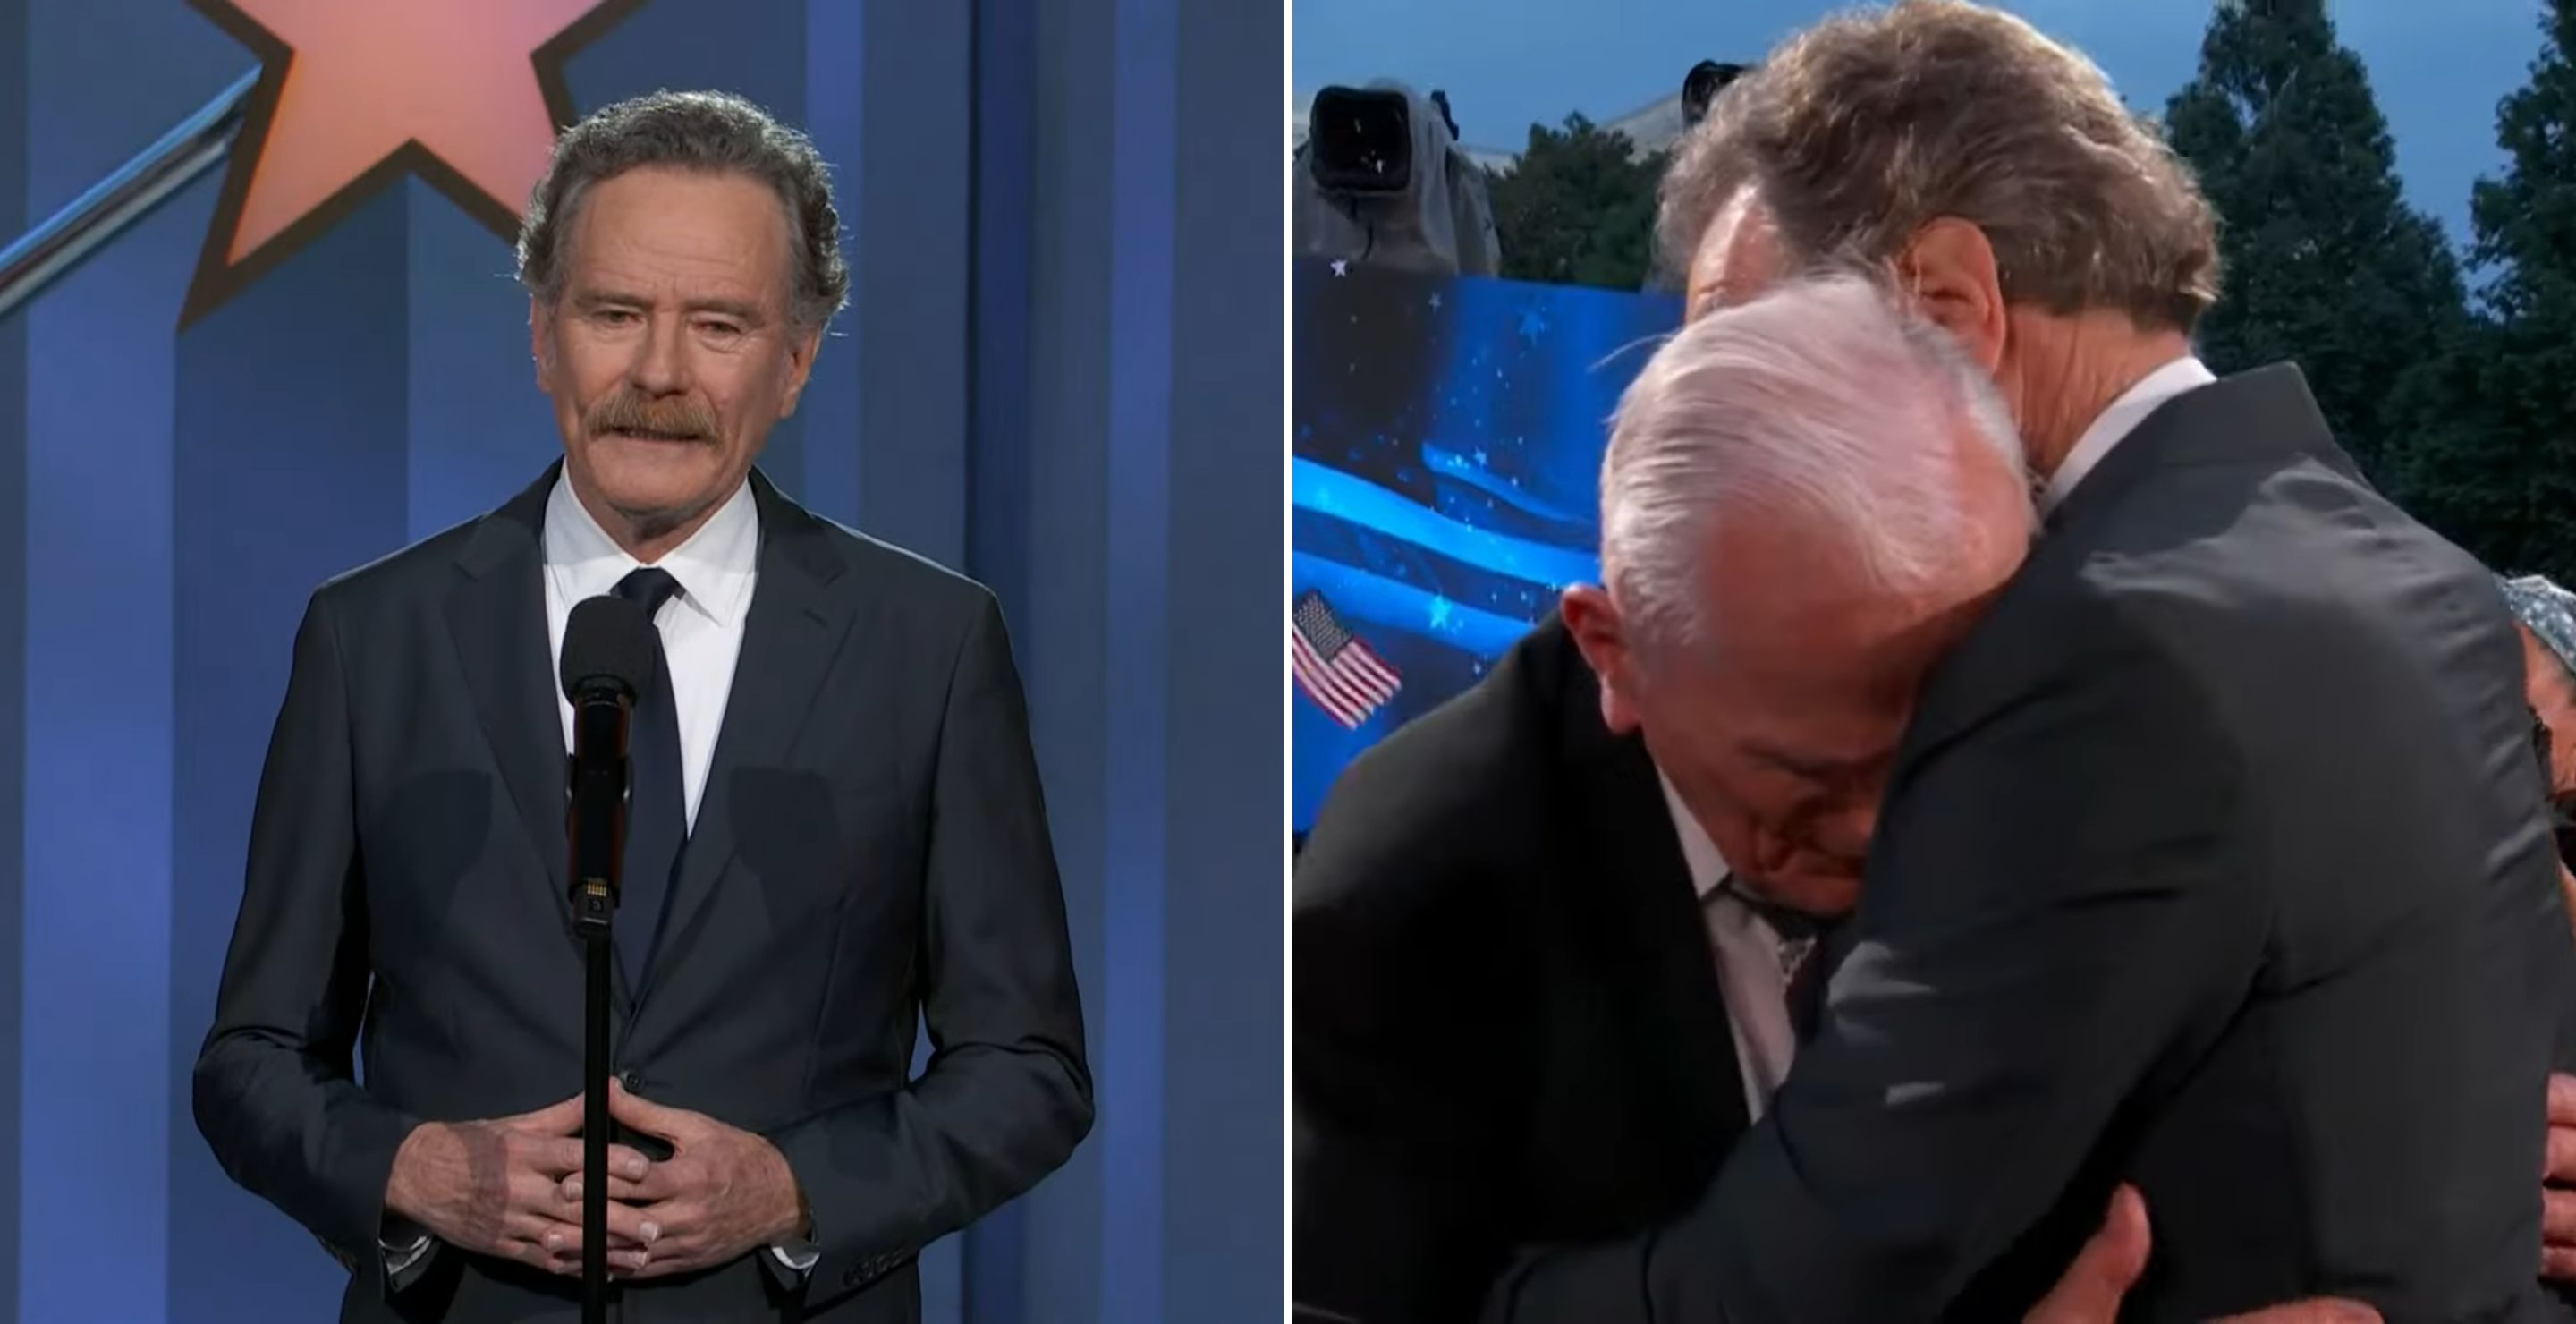 Bryan Cranston Honors The Valor Of A WW2 Veteran In Powerful Memorial Day Story